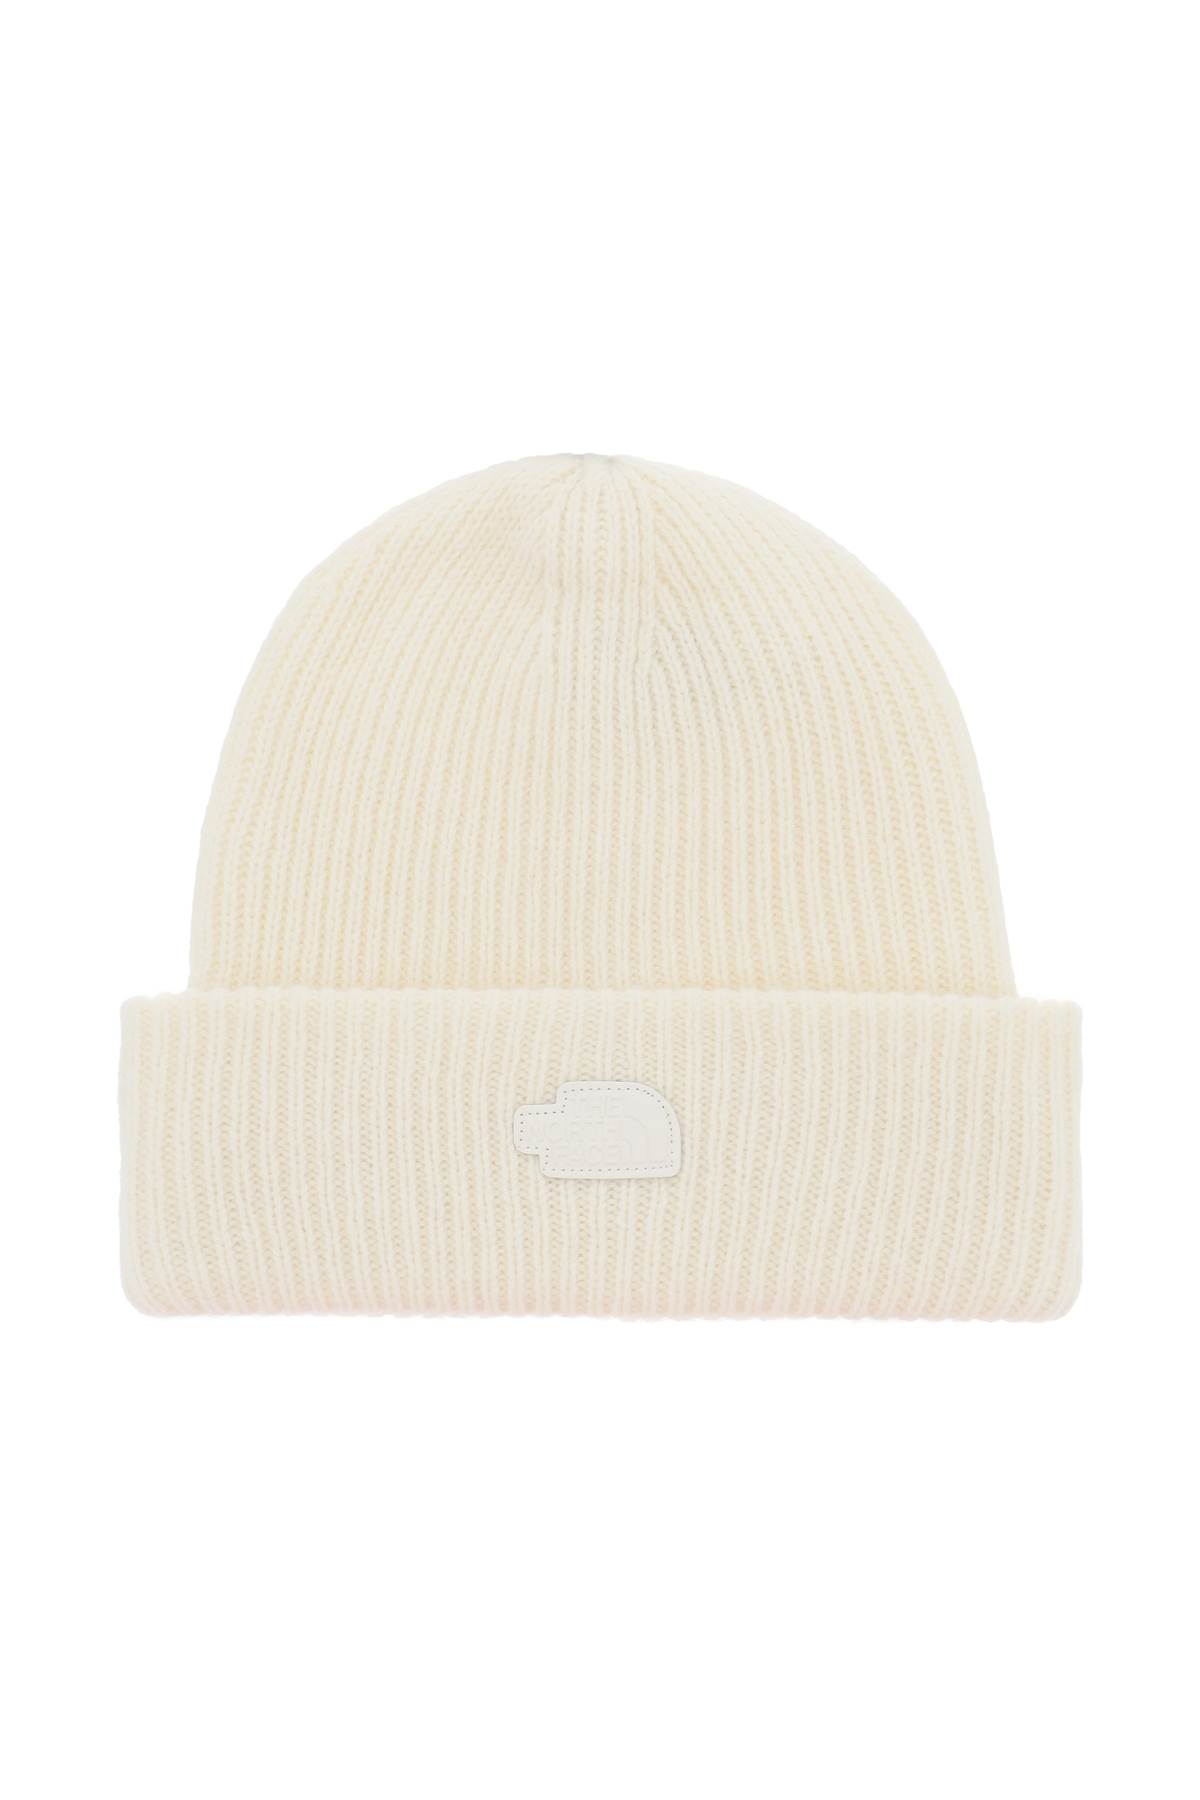 The North Face Citystreet Beanie Hat